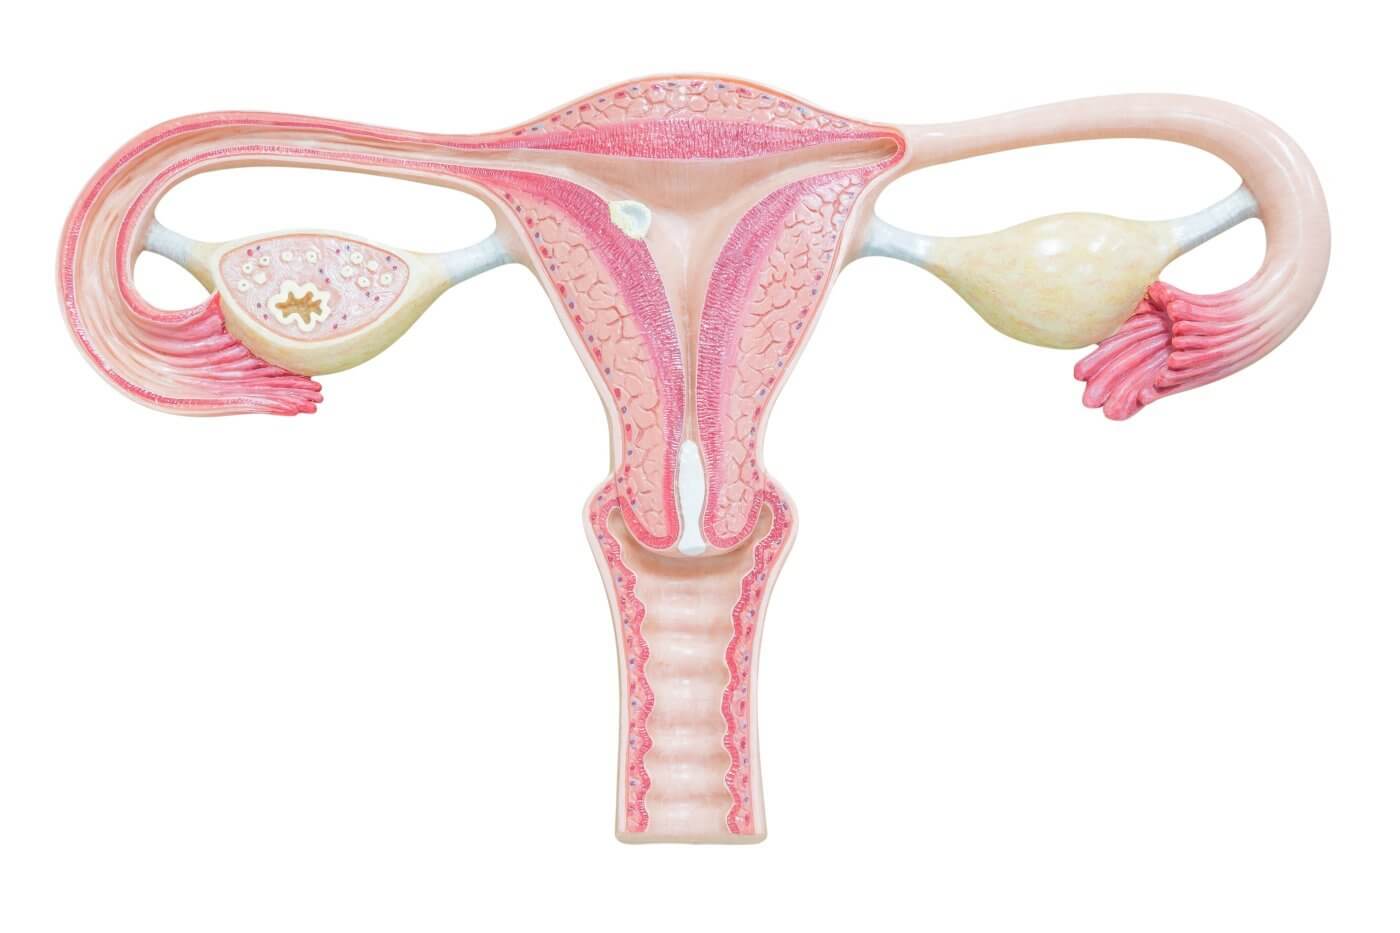 uterus and ovaries indicating need for natural medicine for pcos